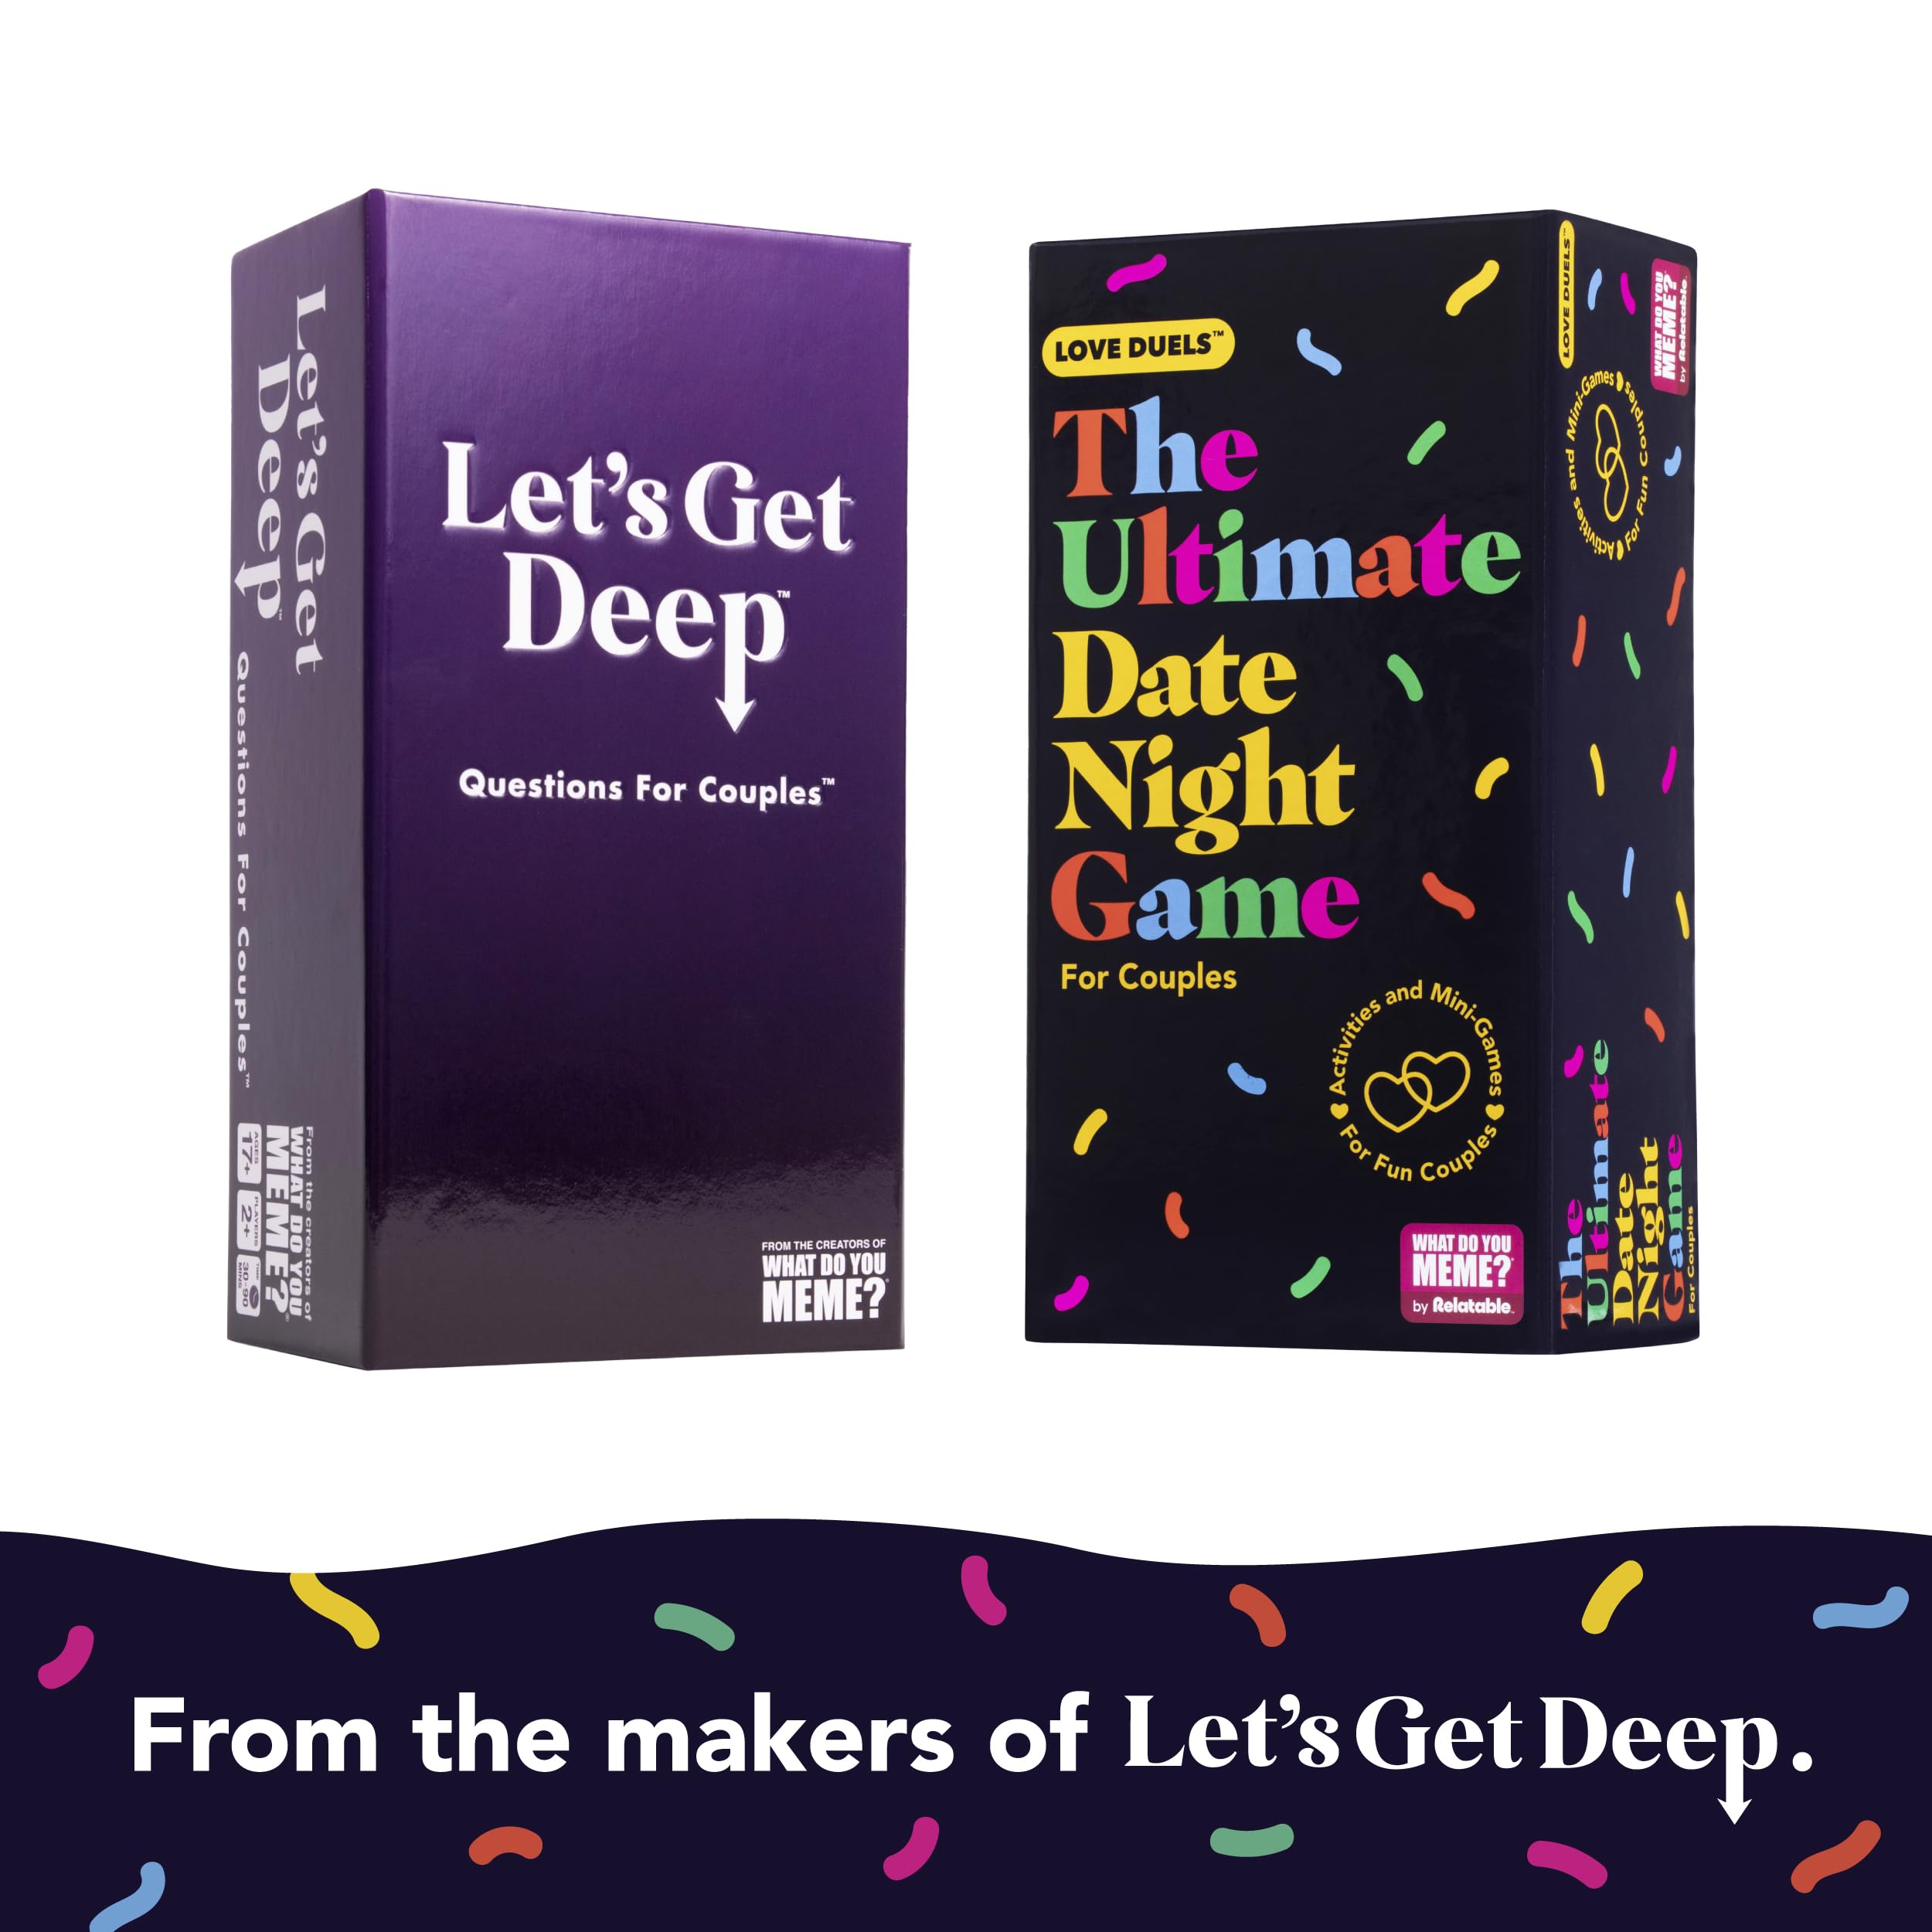 WHAT DO YOU MEME? The Ultimate Date Night Game - Relationship Card Game by The Creators of Let's Get Deep, Great Gift for Valentine's Day